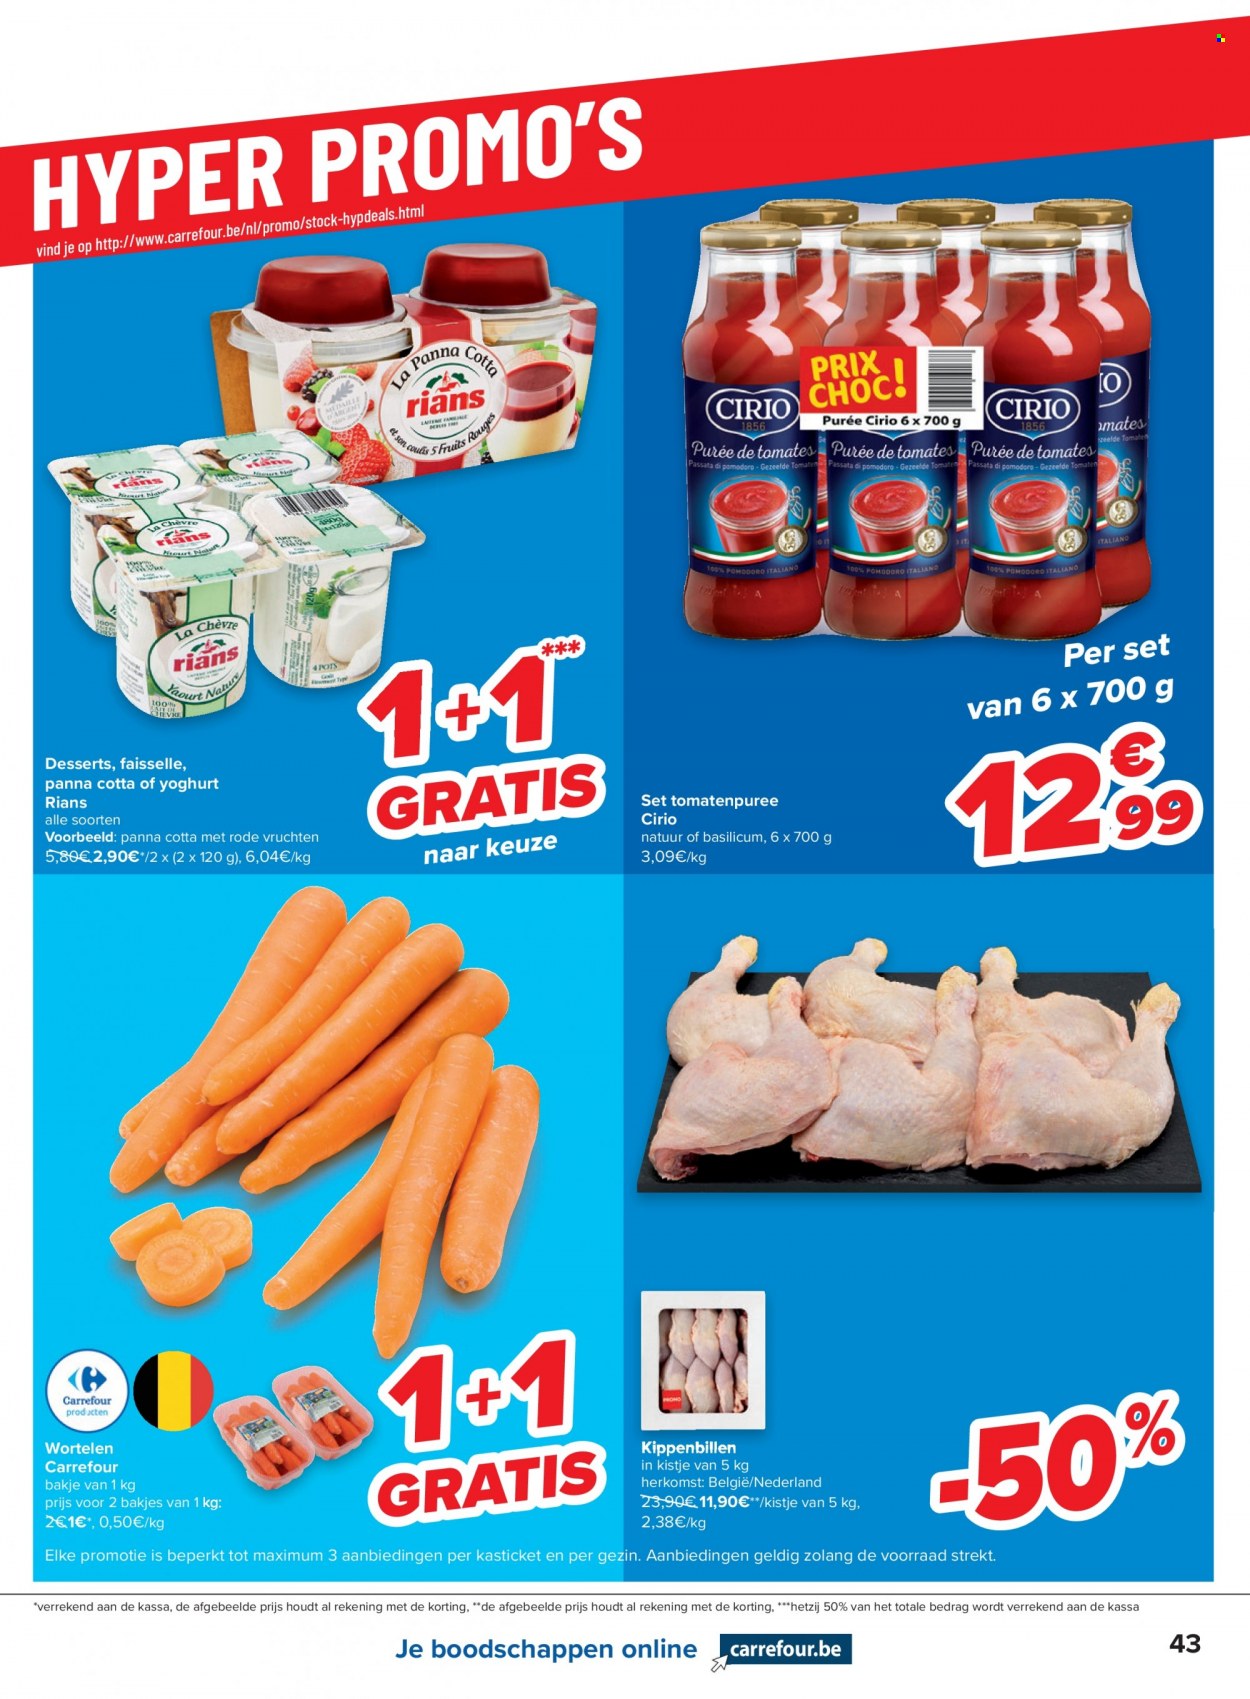 Catalogue Carrefour hypermarkt - 24.5.2022 - 30.5.2022. Page 43.